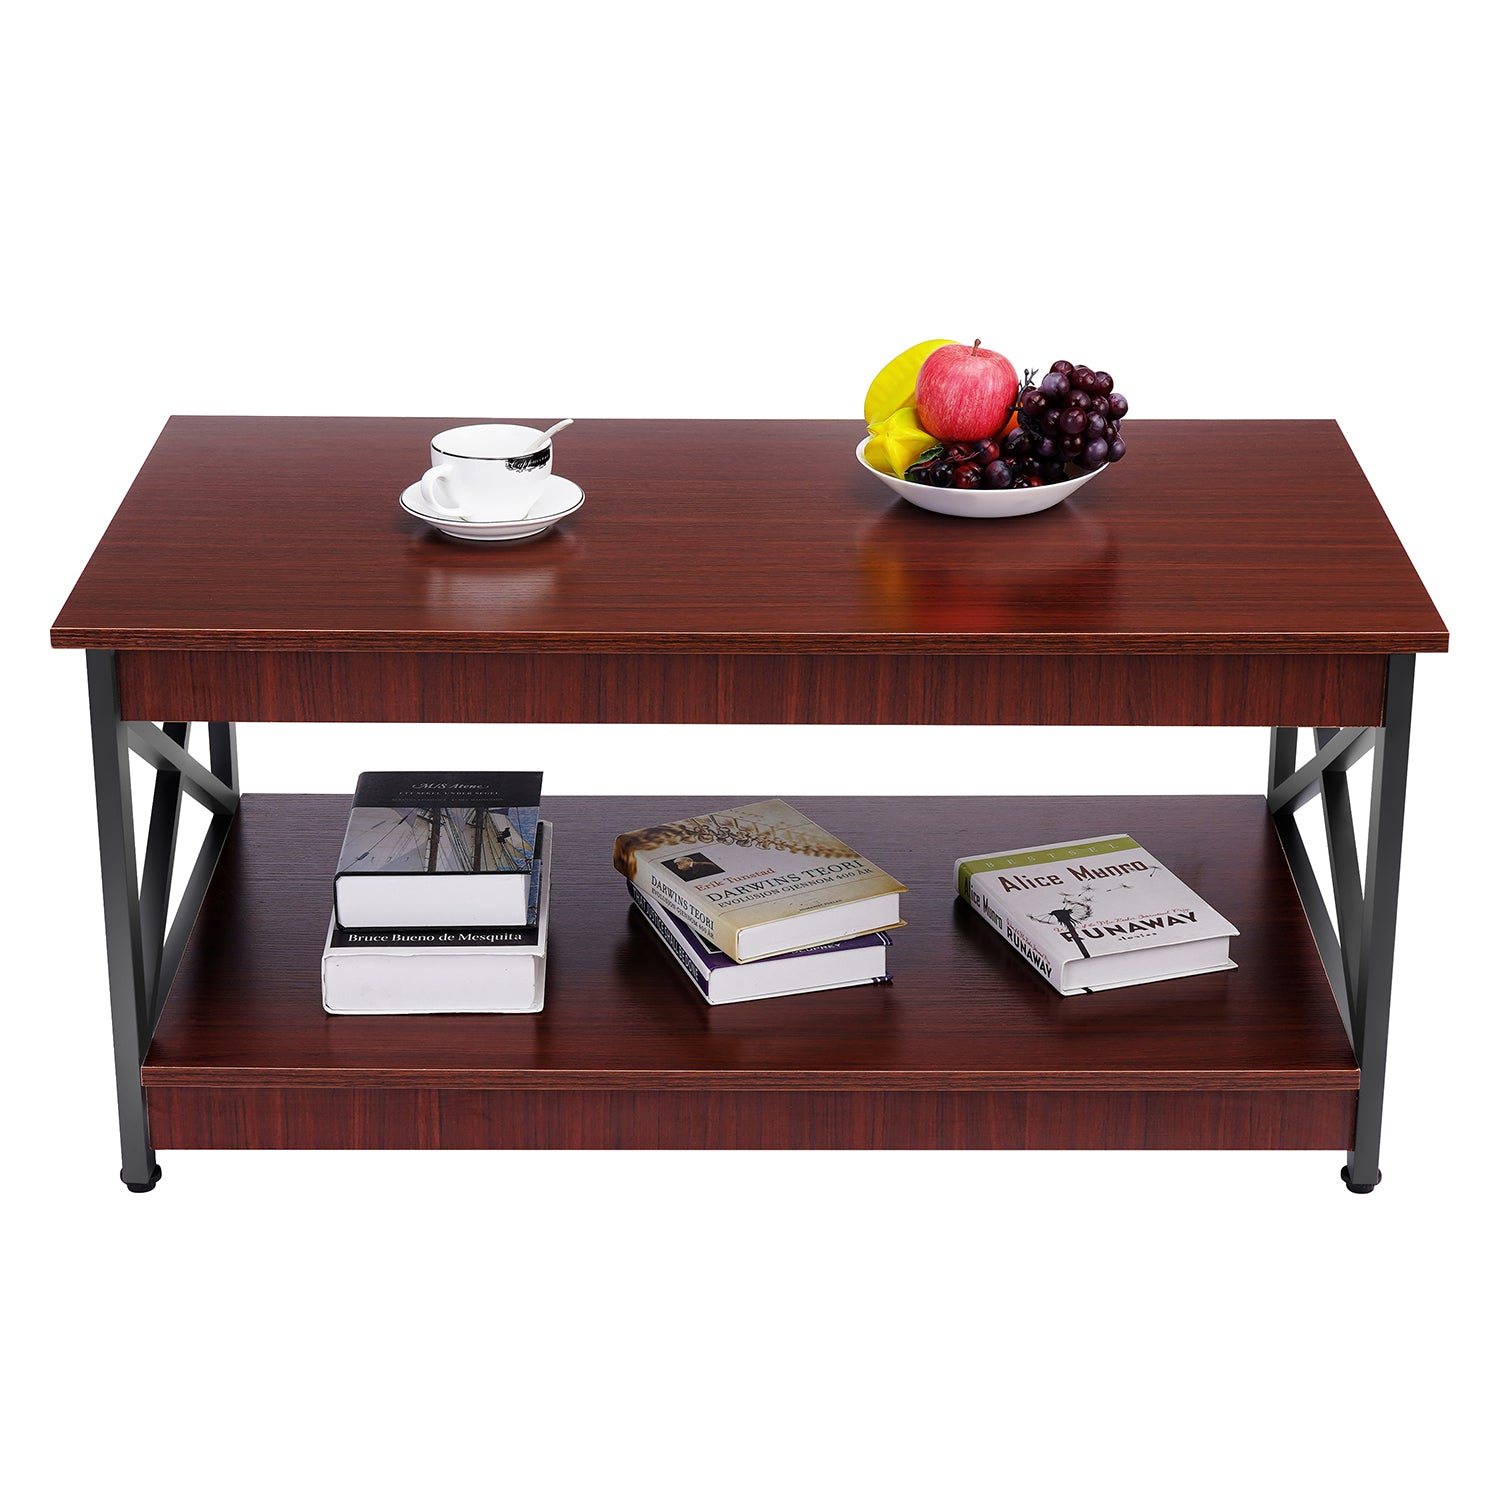 Wood 2-Tier Coffee Table with Storage Shelf for Living Room, X Design Accent Cocktail Table, Easy Assembly Home Furniture